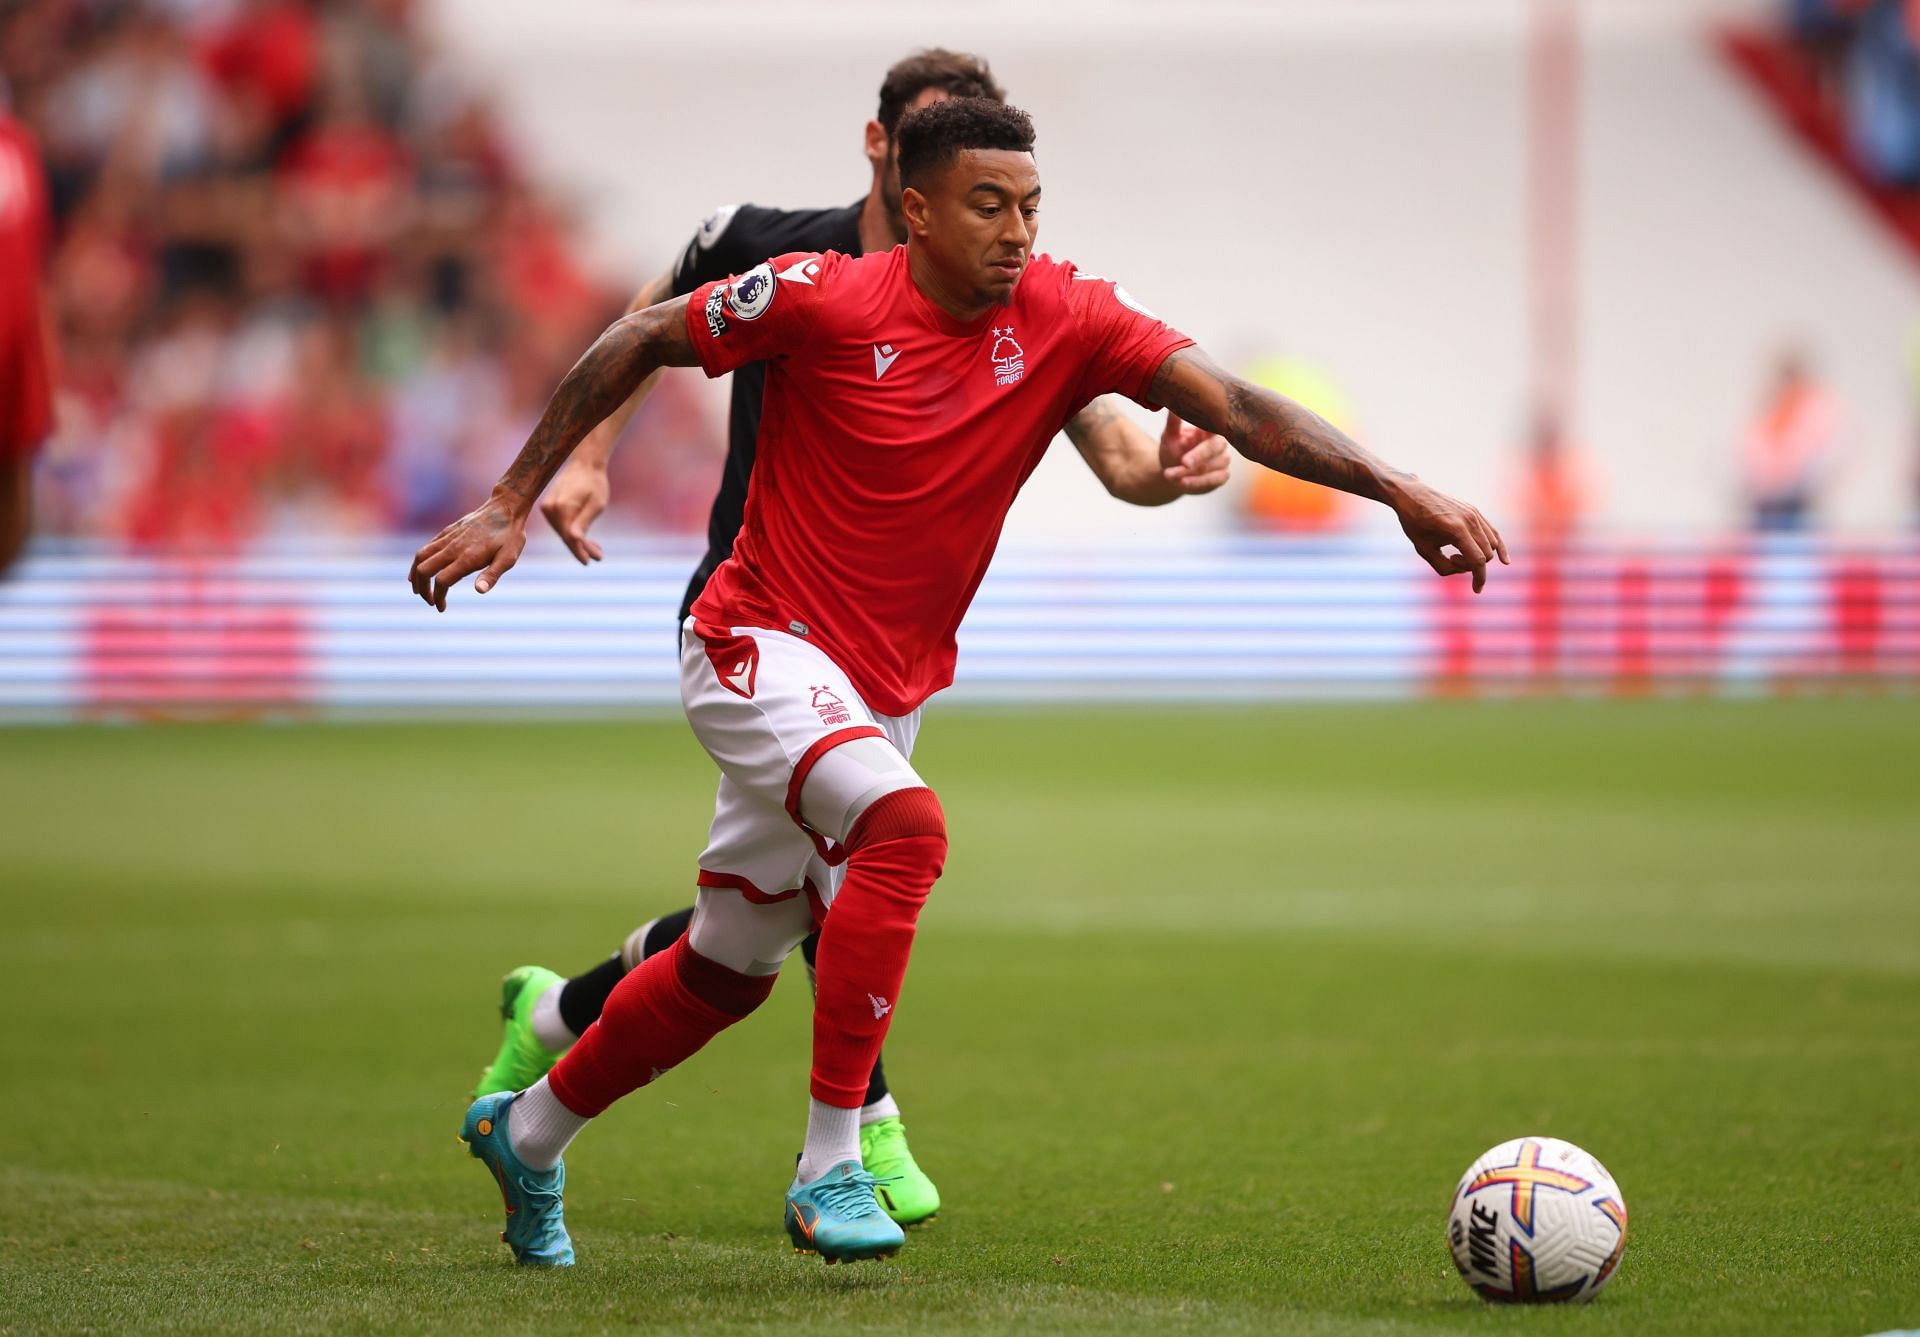 NJesse Lingard moved to join Nottingham Forest